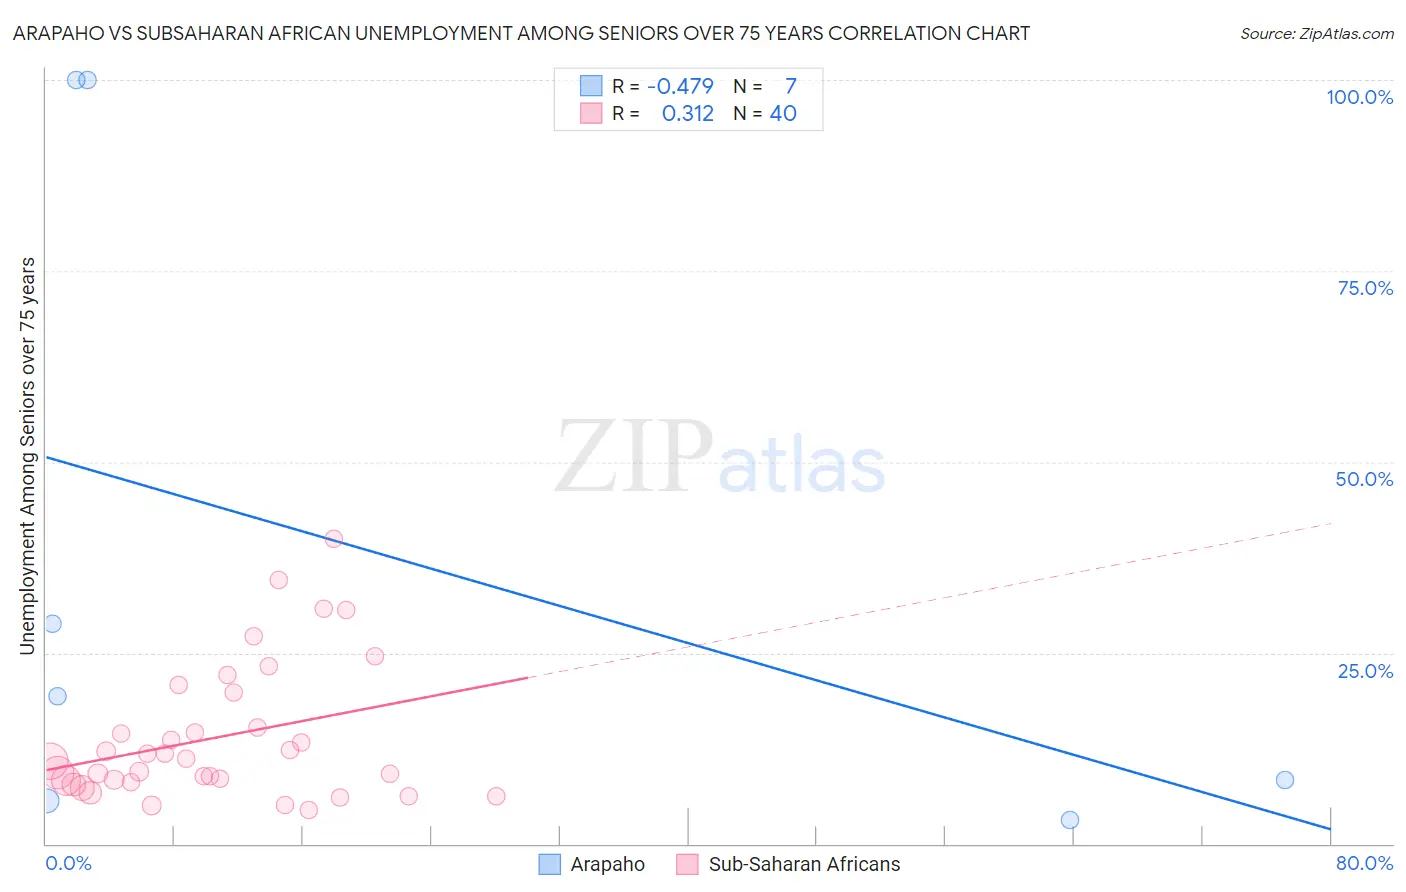 Arapaho vs Subsaharan African Unemployment Among Seniors over 75 years